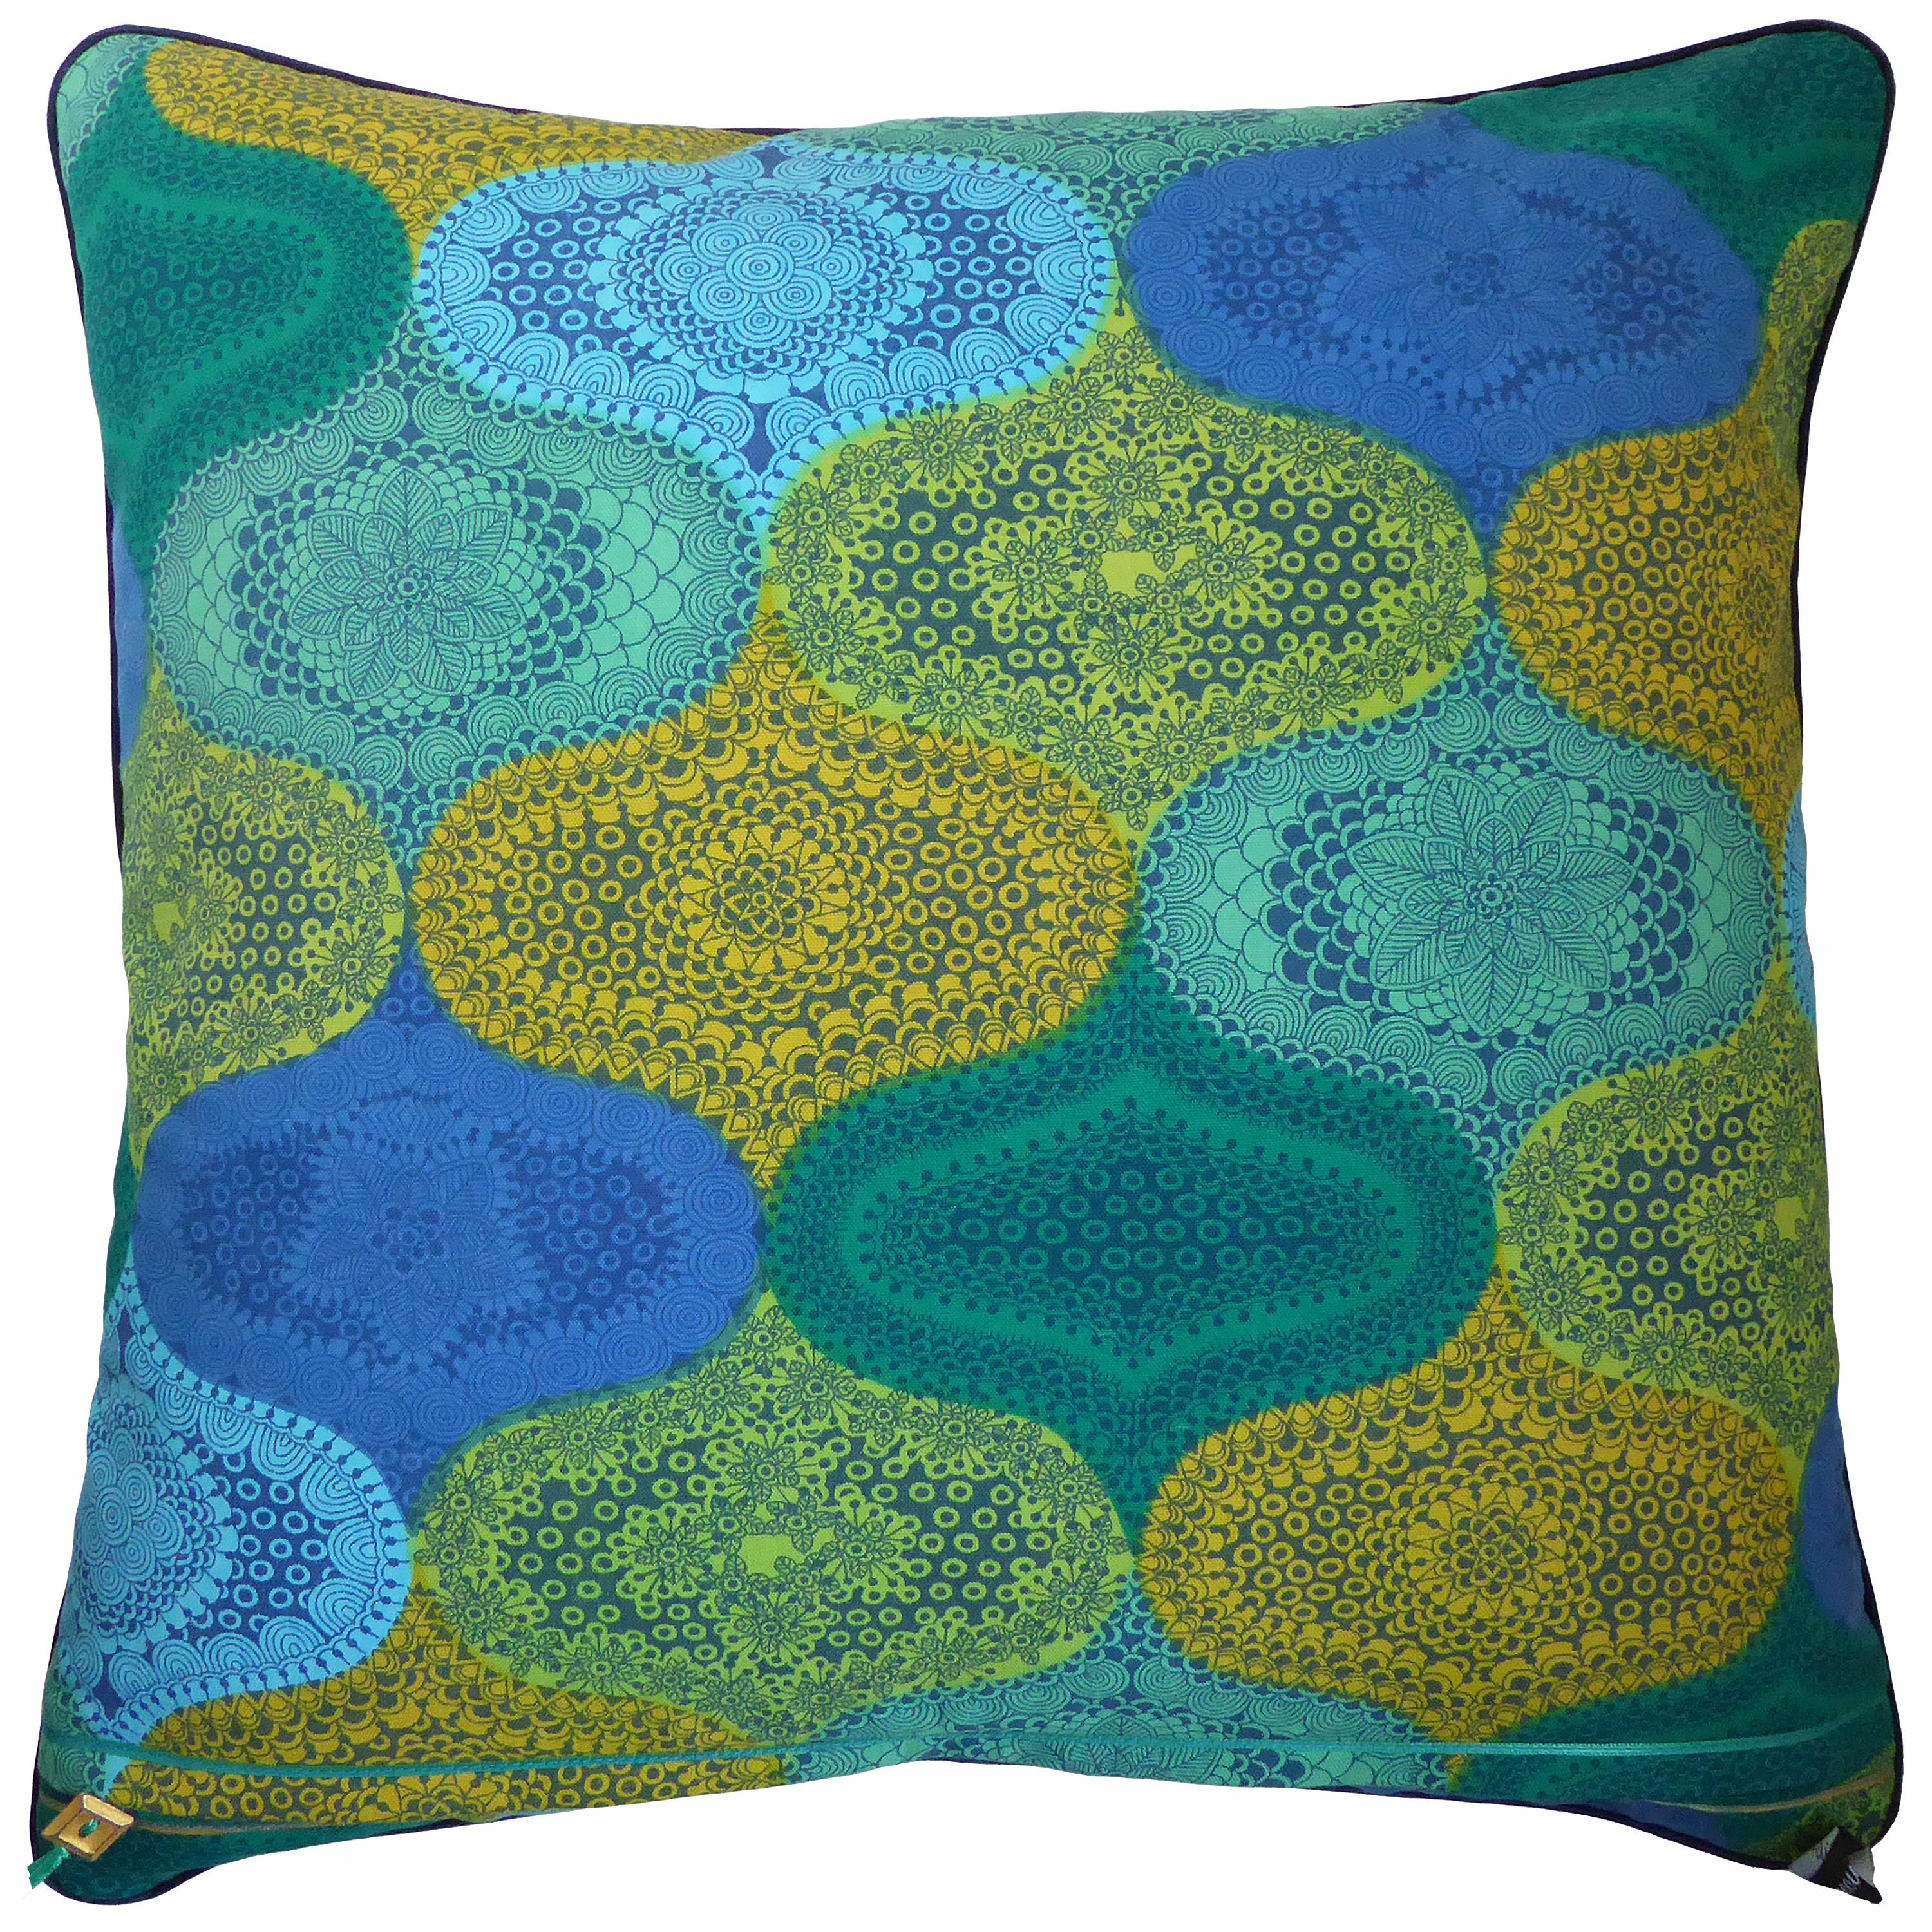 English ‘Vintage Cushions’ Luxury Bespoke-Made Pillow �‘Alhambra', Made in London